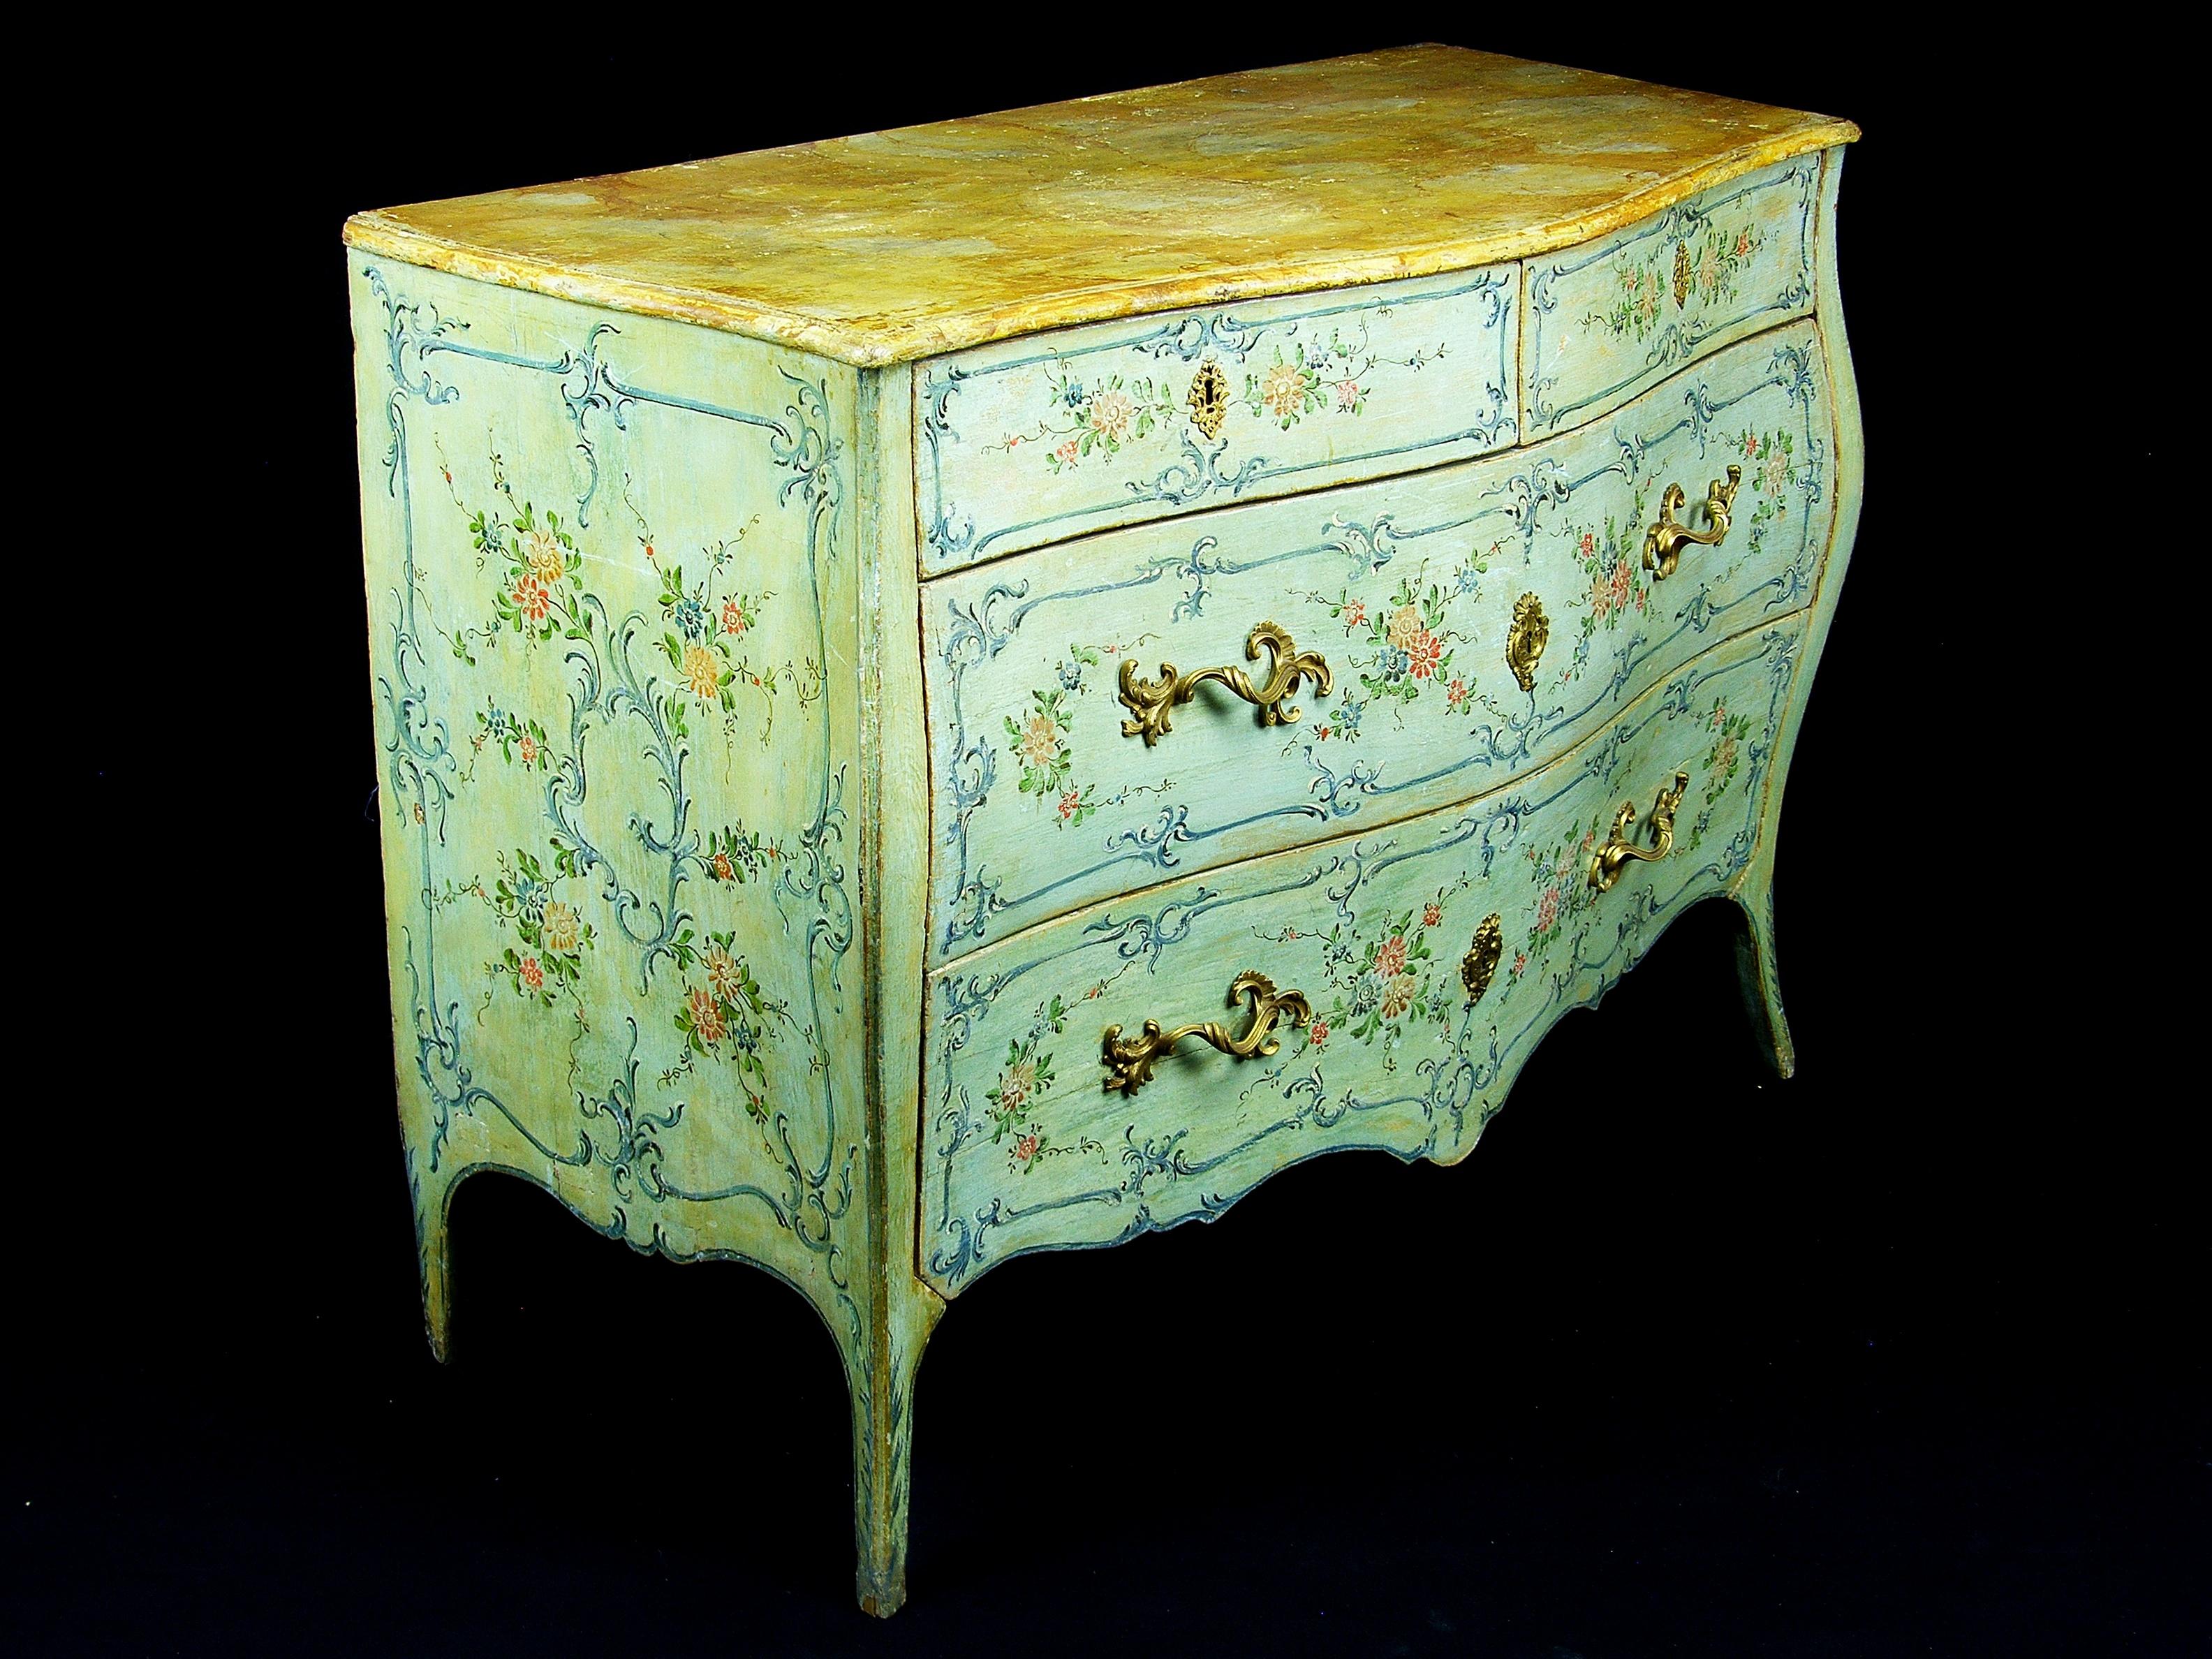 Polychrome lacquered wooden dresser with floral decorations
18th century, Italian Genoa

Elegant Italian (Genoese) chest of drawers of the 18th century, made of lacquered wood in green-blue tones with polychrome floral decorations and rocaille